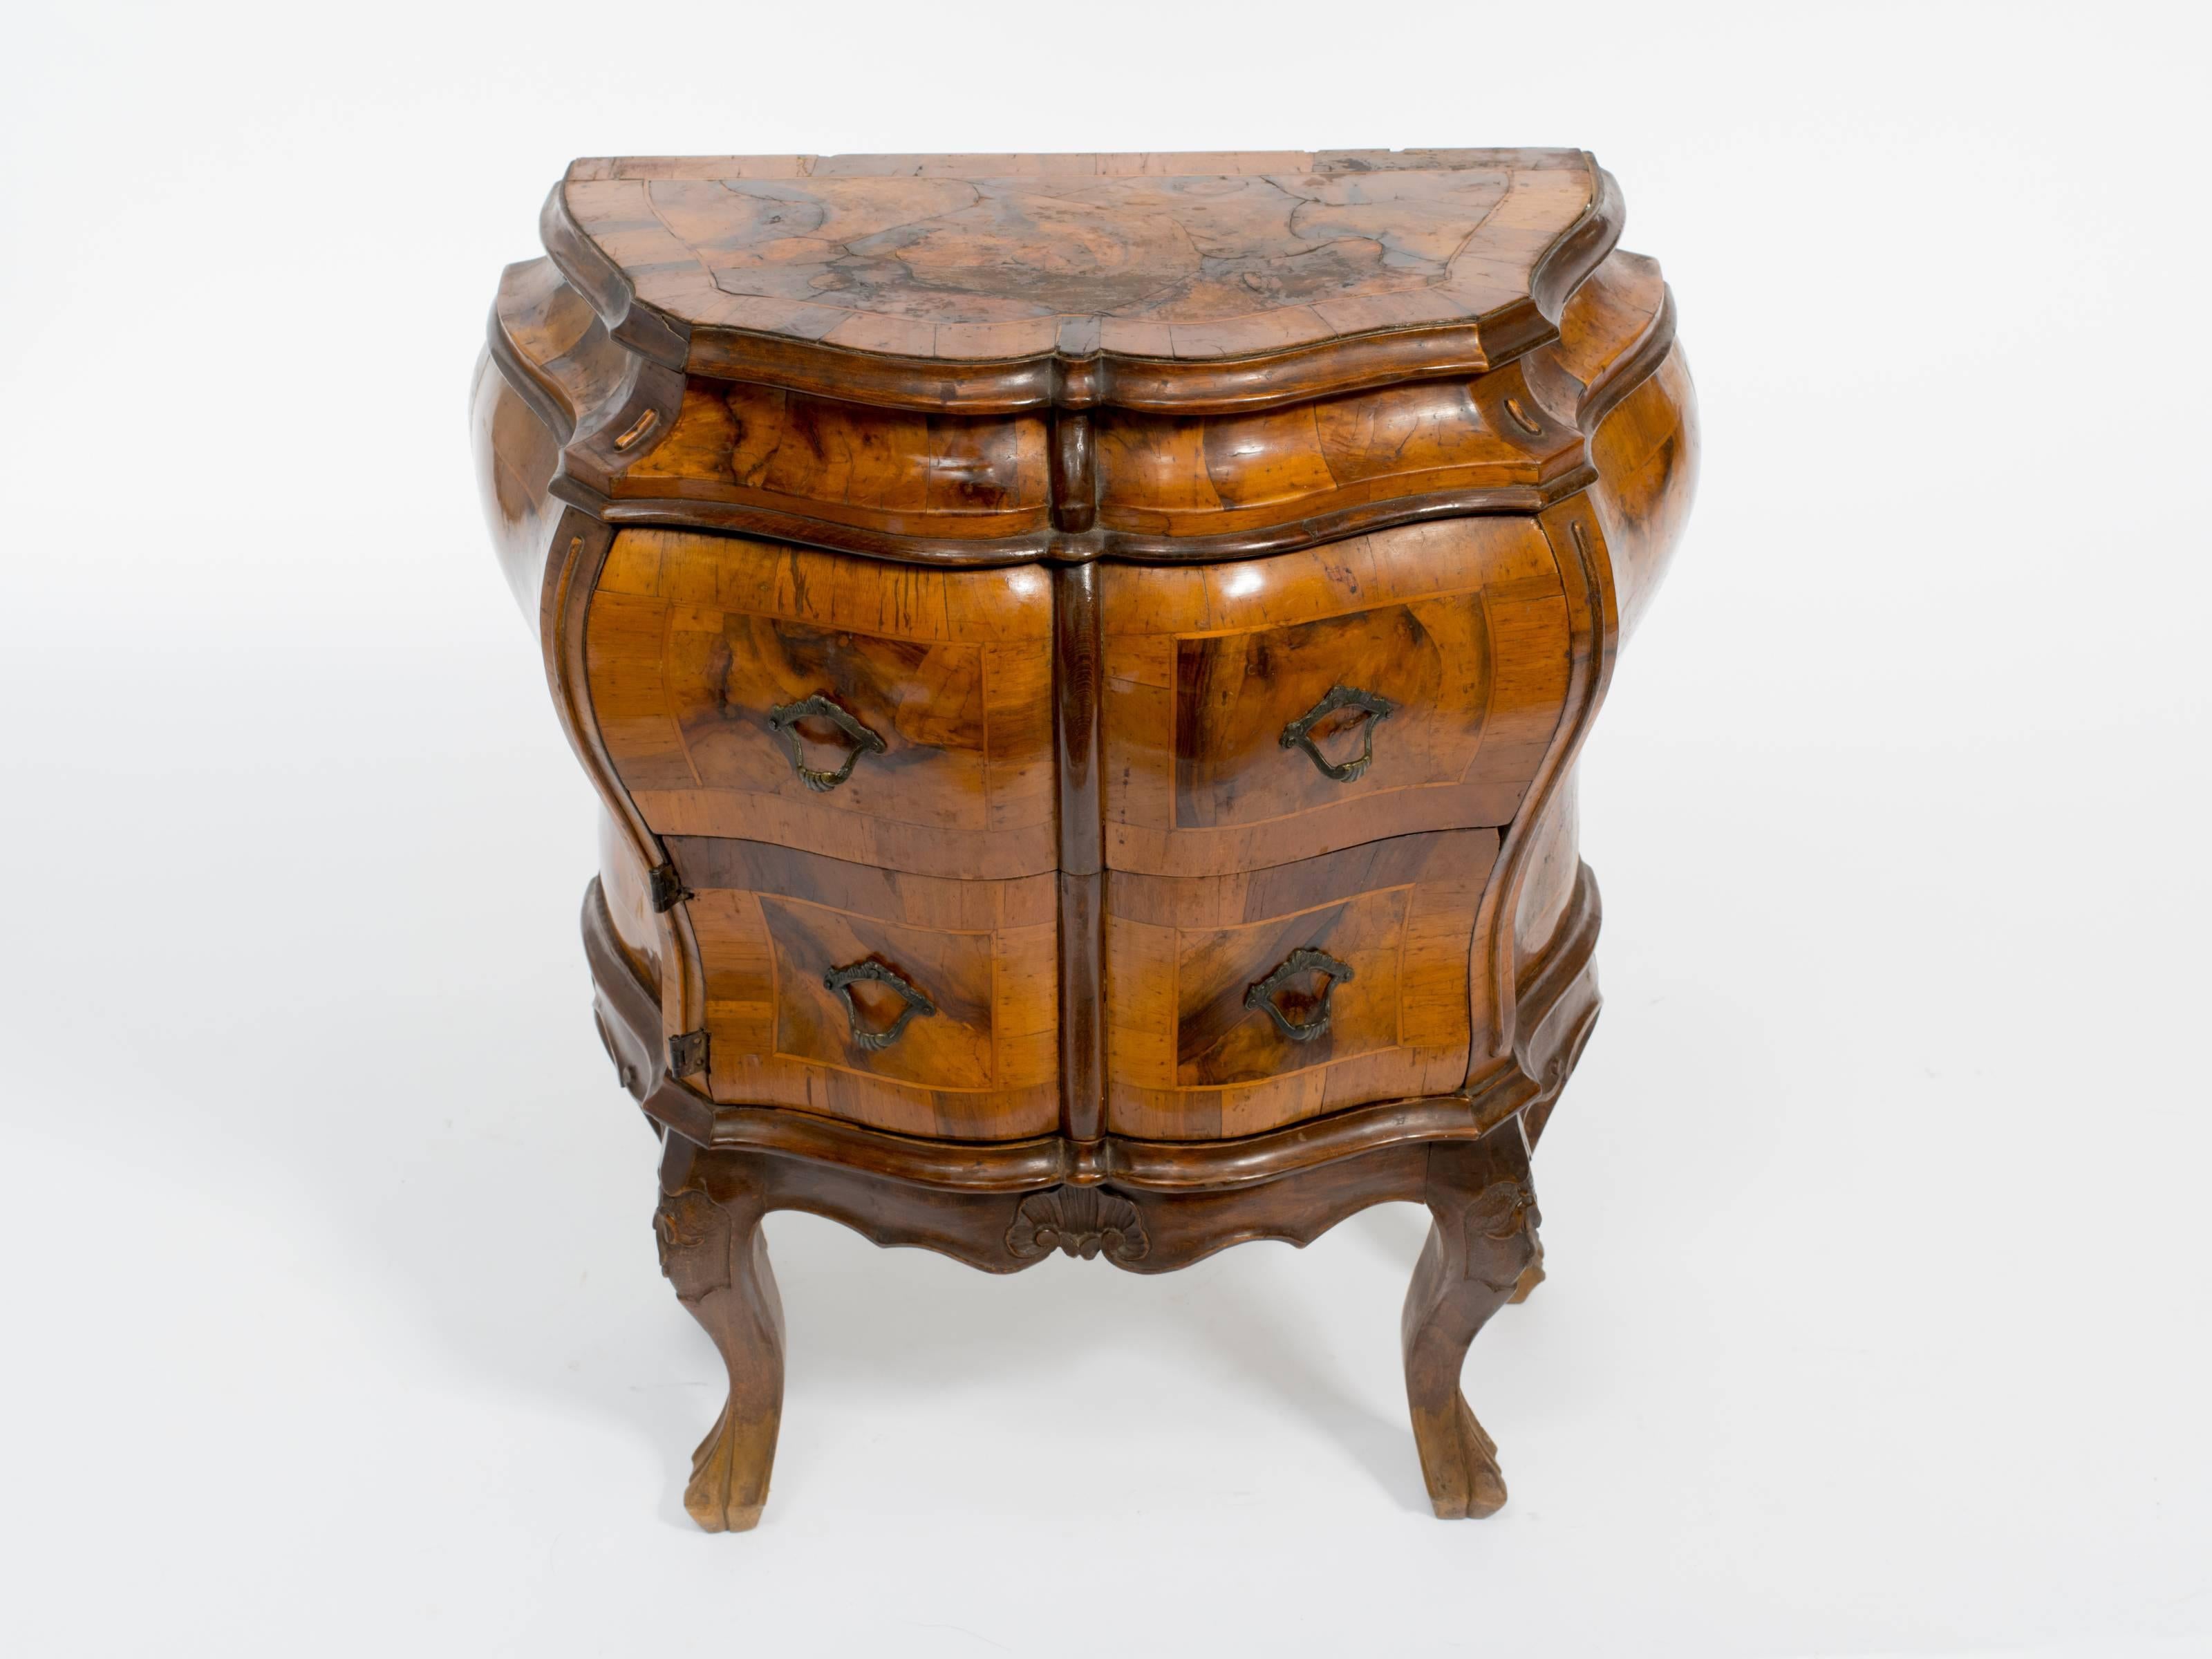 Petite burl bombe cabinet. It has a drawer and cabinet section.